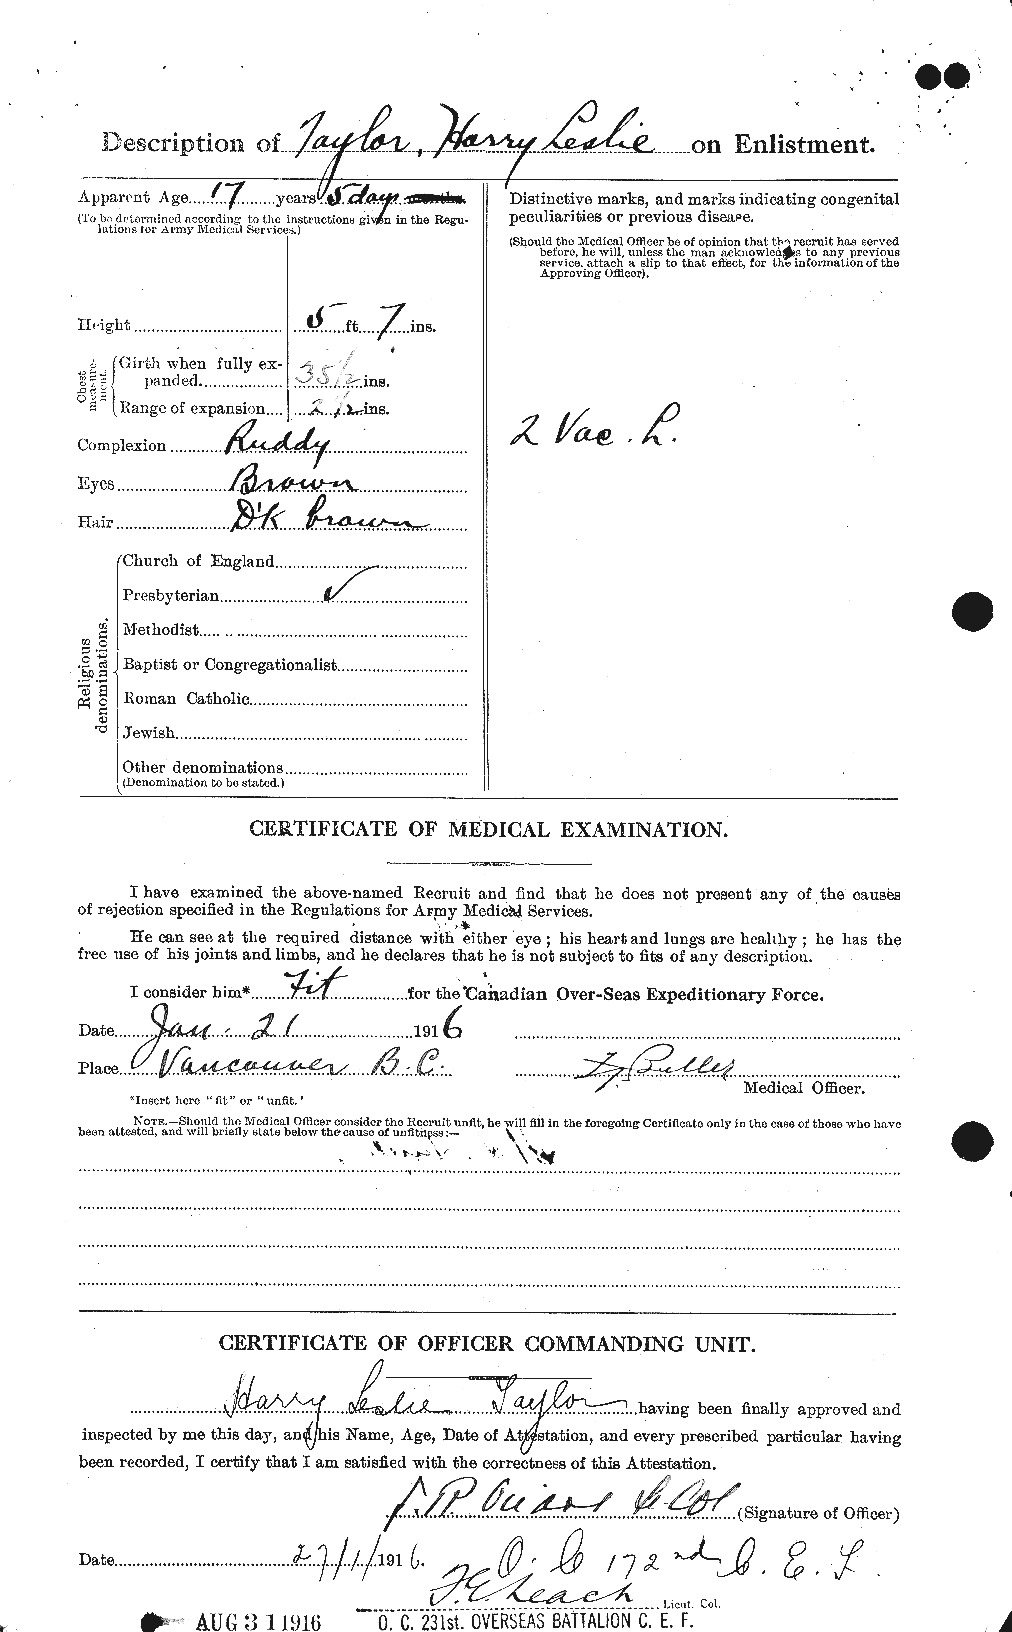 Personnel Records of the First World War - CEF 626499b